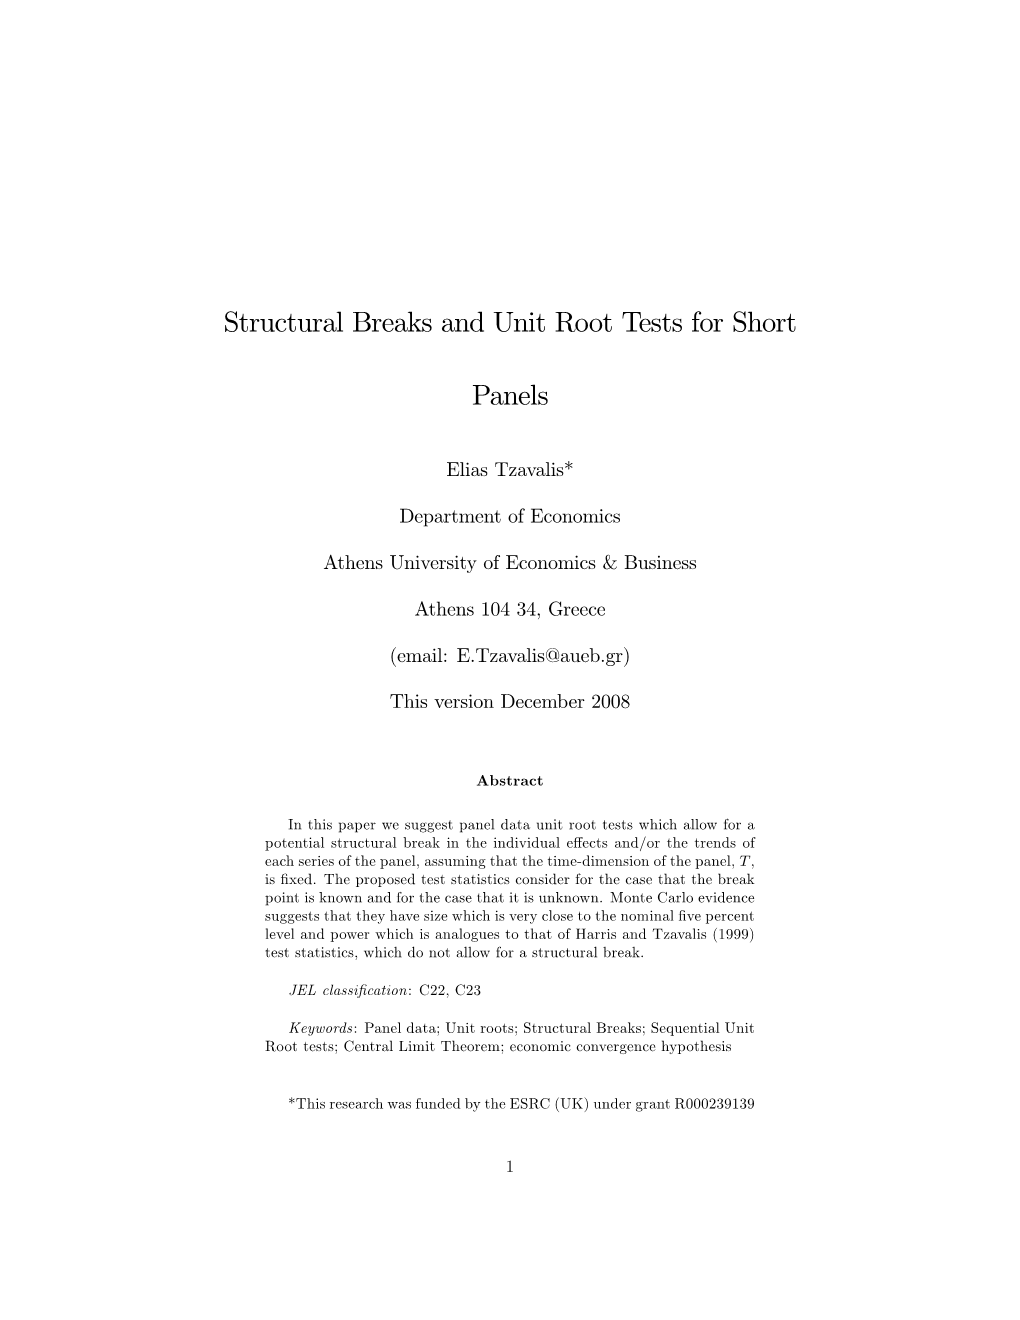 Structural Breaks and Unit Root Tests for Short Panels